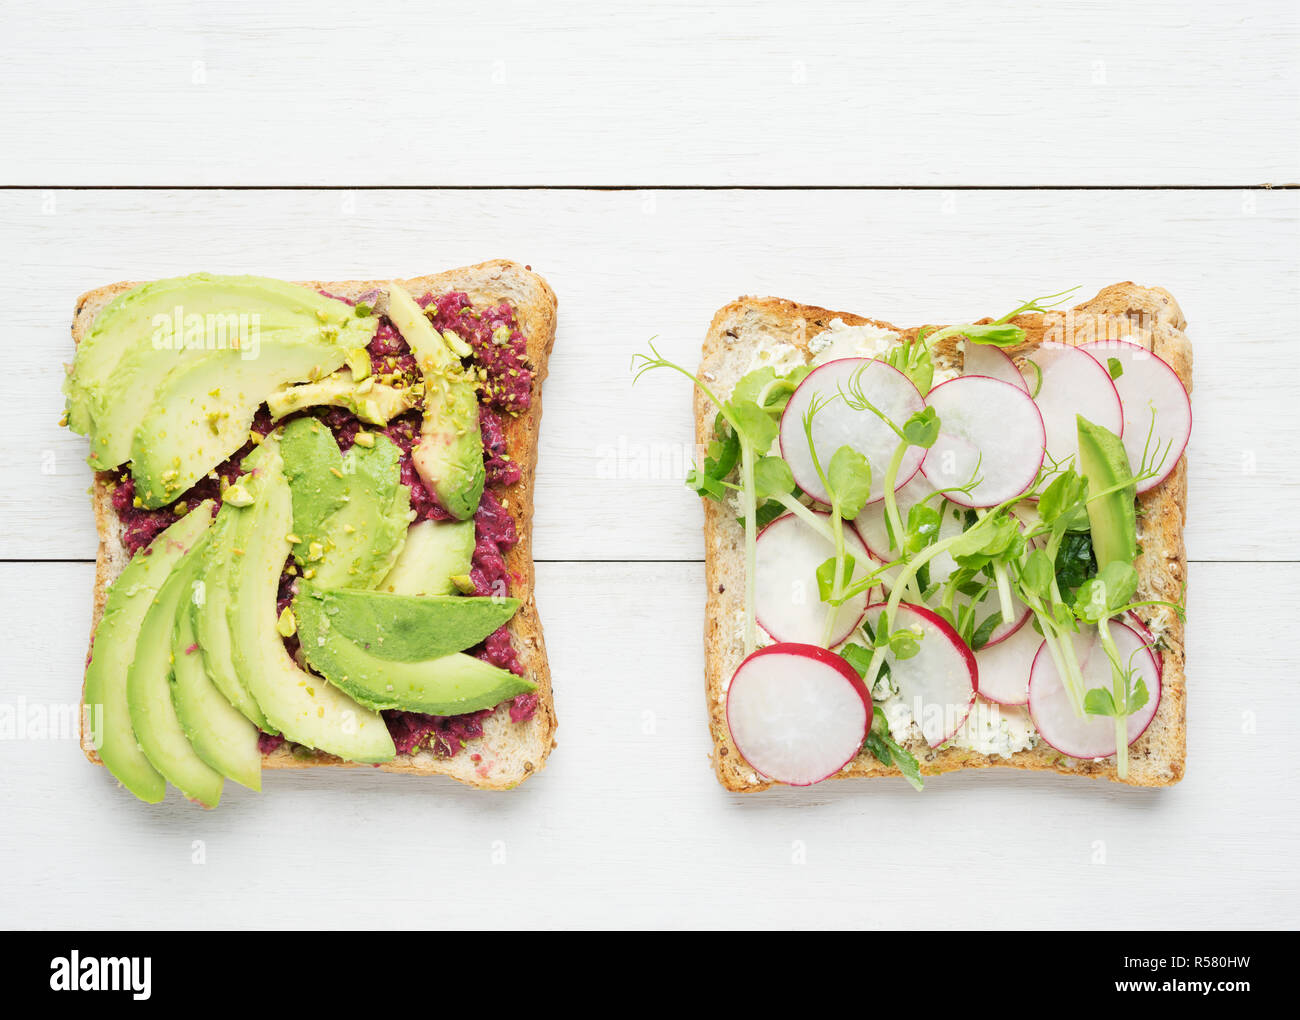 Two avocado toasts with mashed avocado and beetroot,sliced avocado ,radish, snow pea sprouts and goat cheese on white wooden background Stock Photo